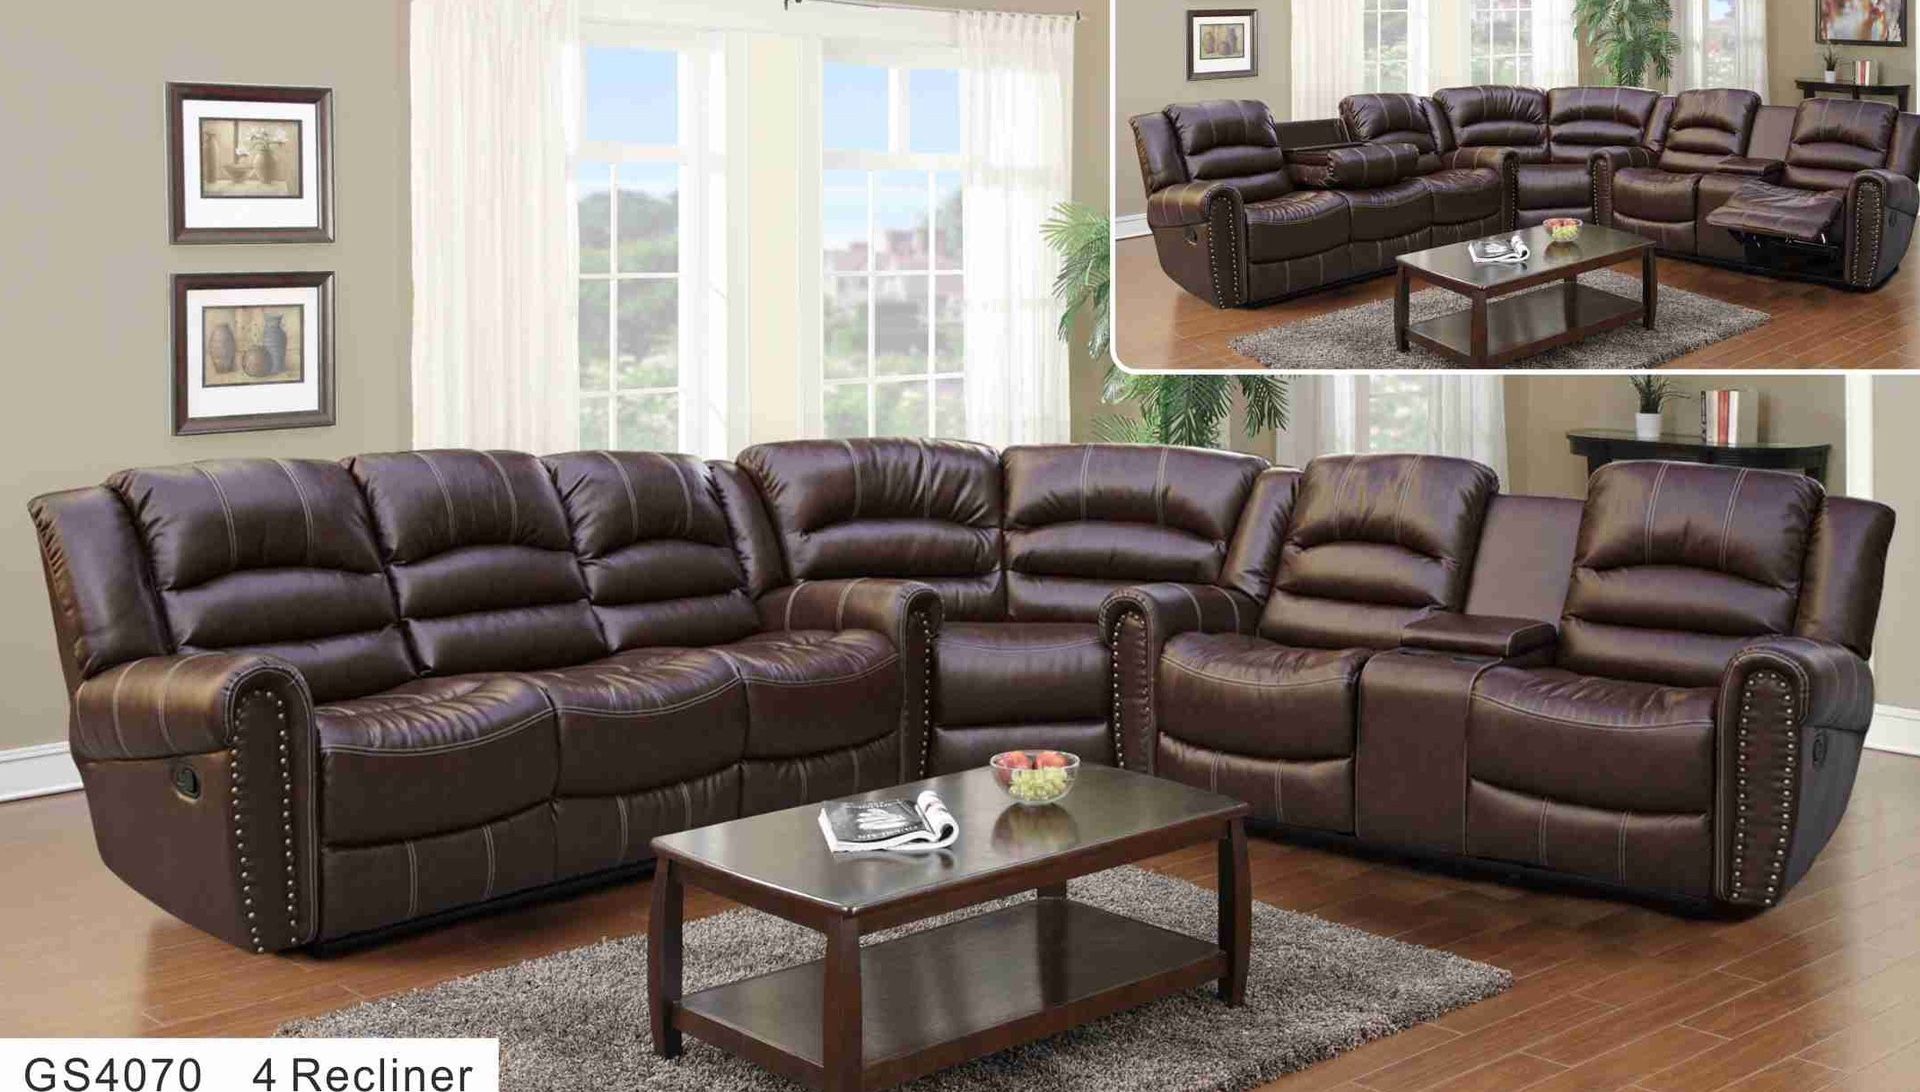 New baseball stitch brown bonded leather reclining sectional couch with wedge